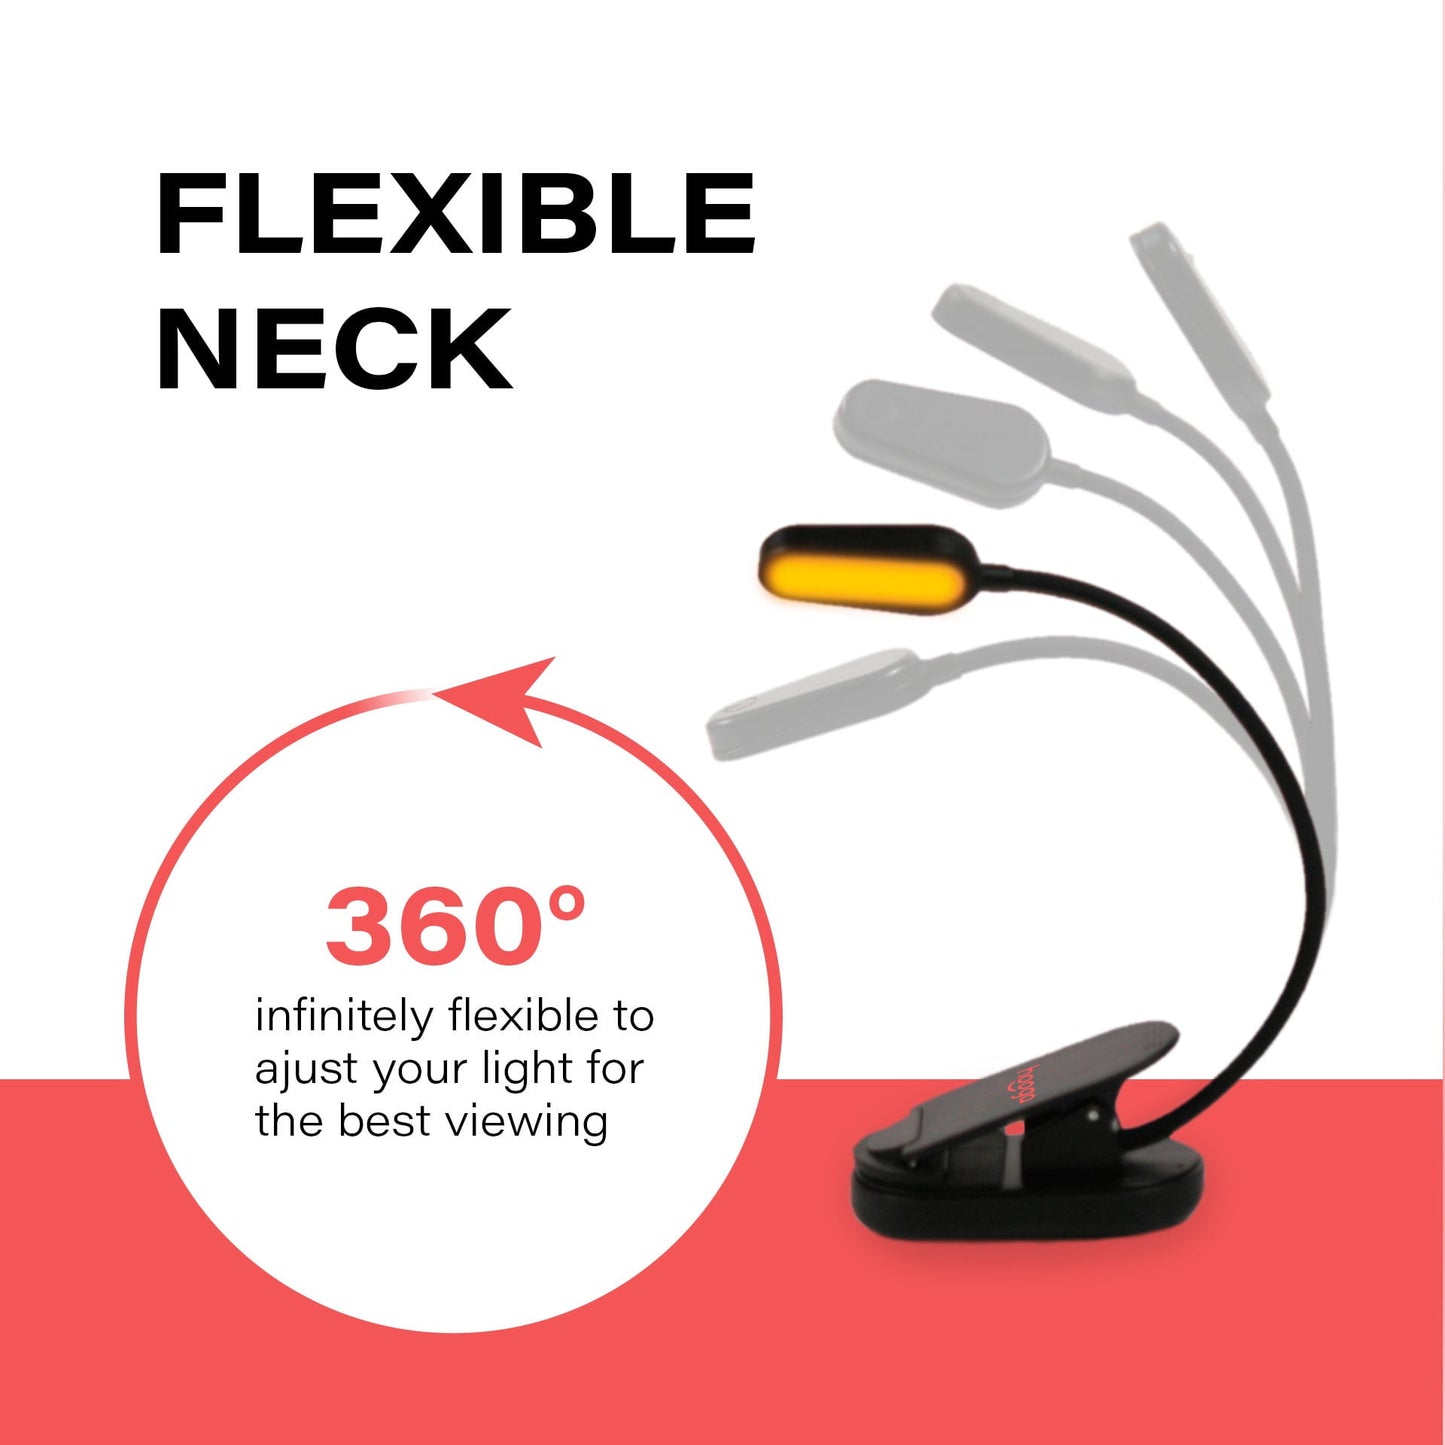 Amber and White Clip-On Book Light